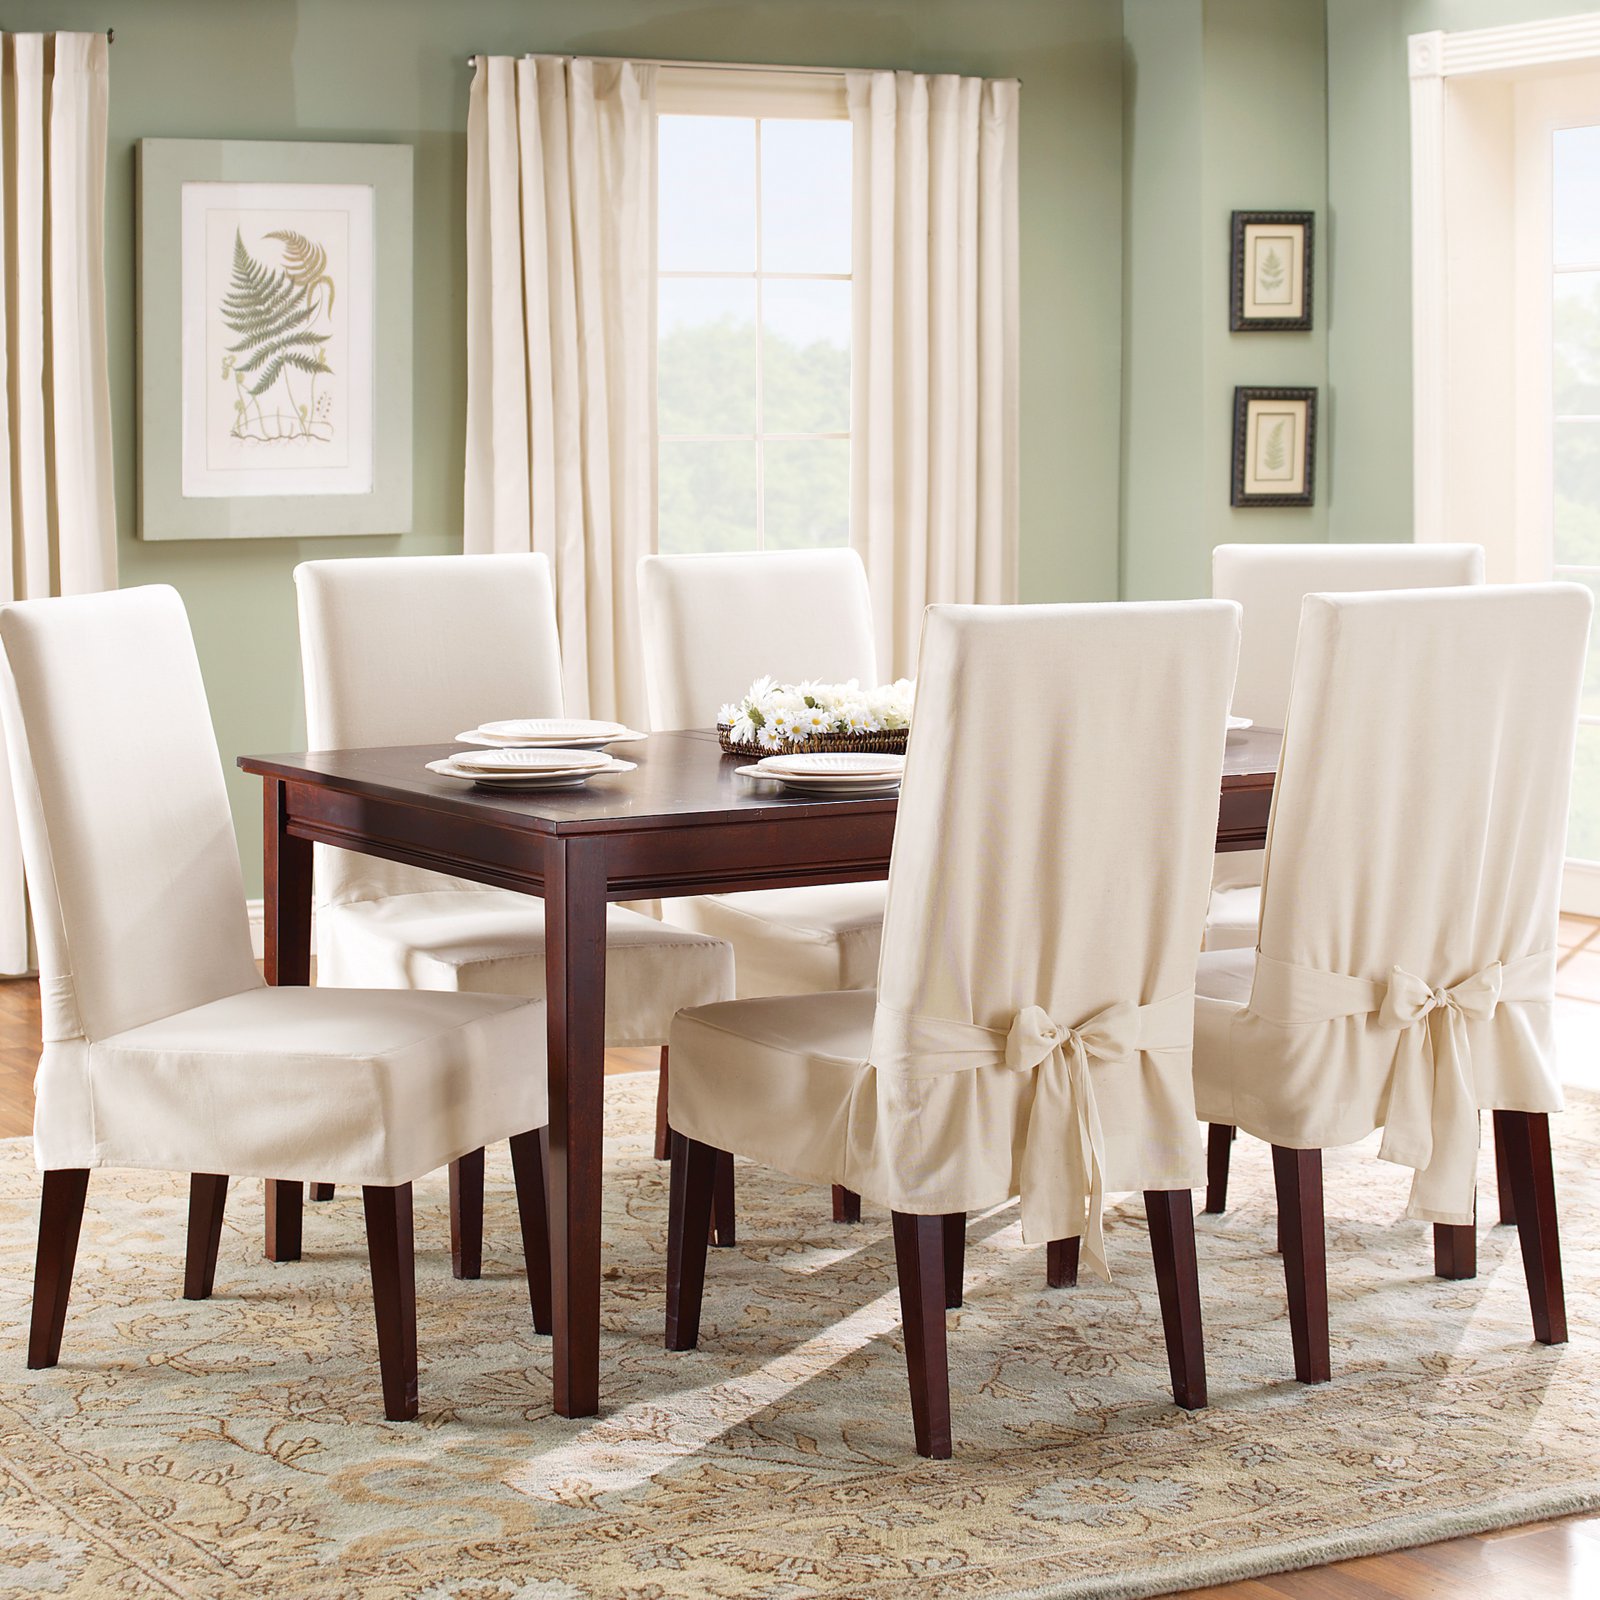 Sure Fit Cotton Duck Dining Room Chair Cover - Walmart.com